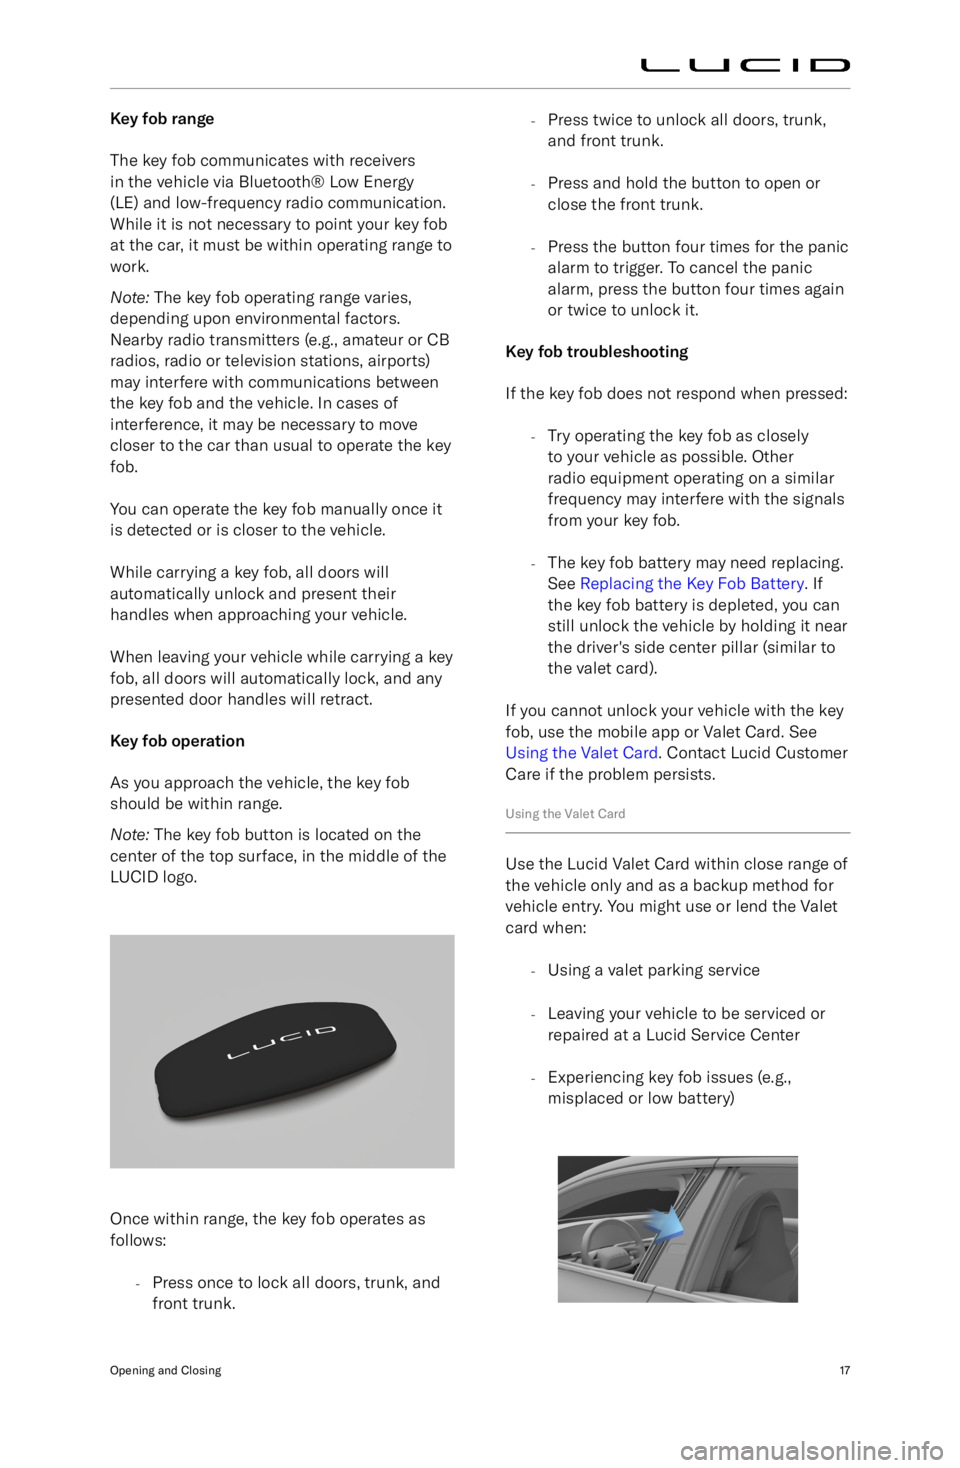 LUCID AIR 2022  Owners Manual Key fob range
The key fob communicates with receivers
in the vehicle via Bluetooth